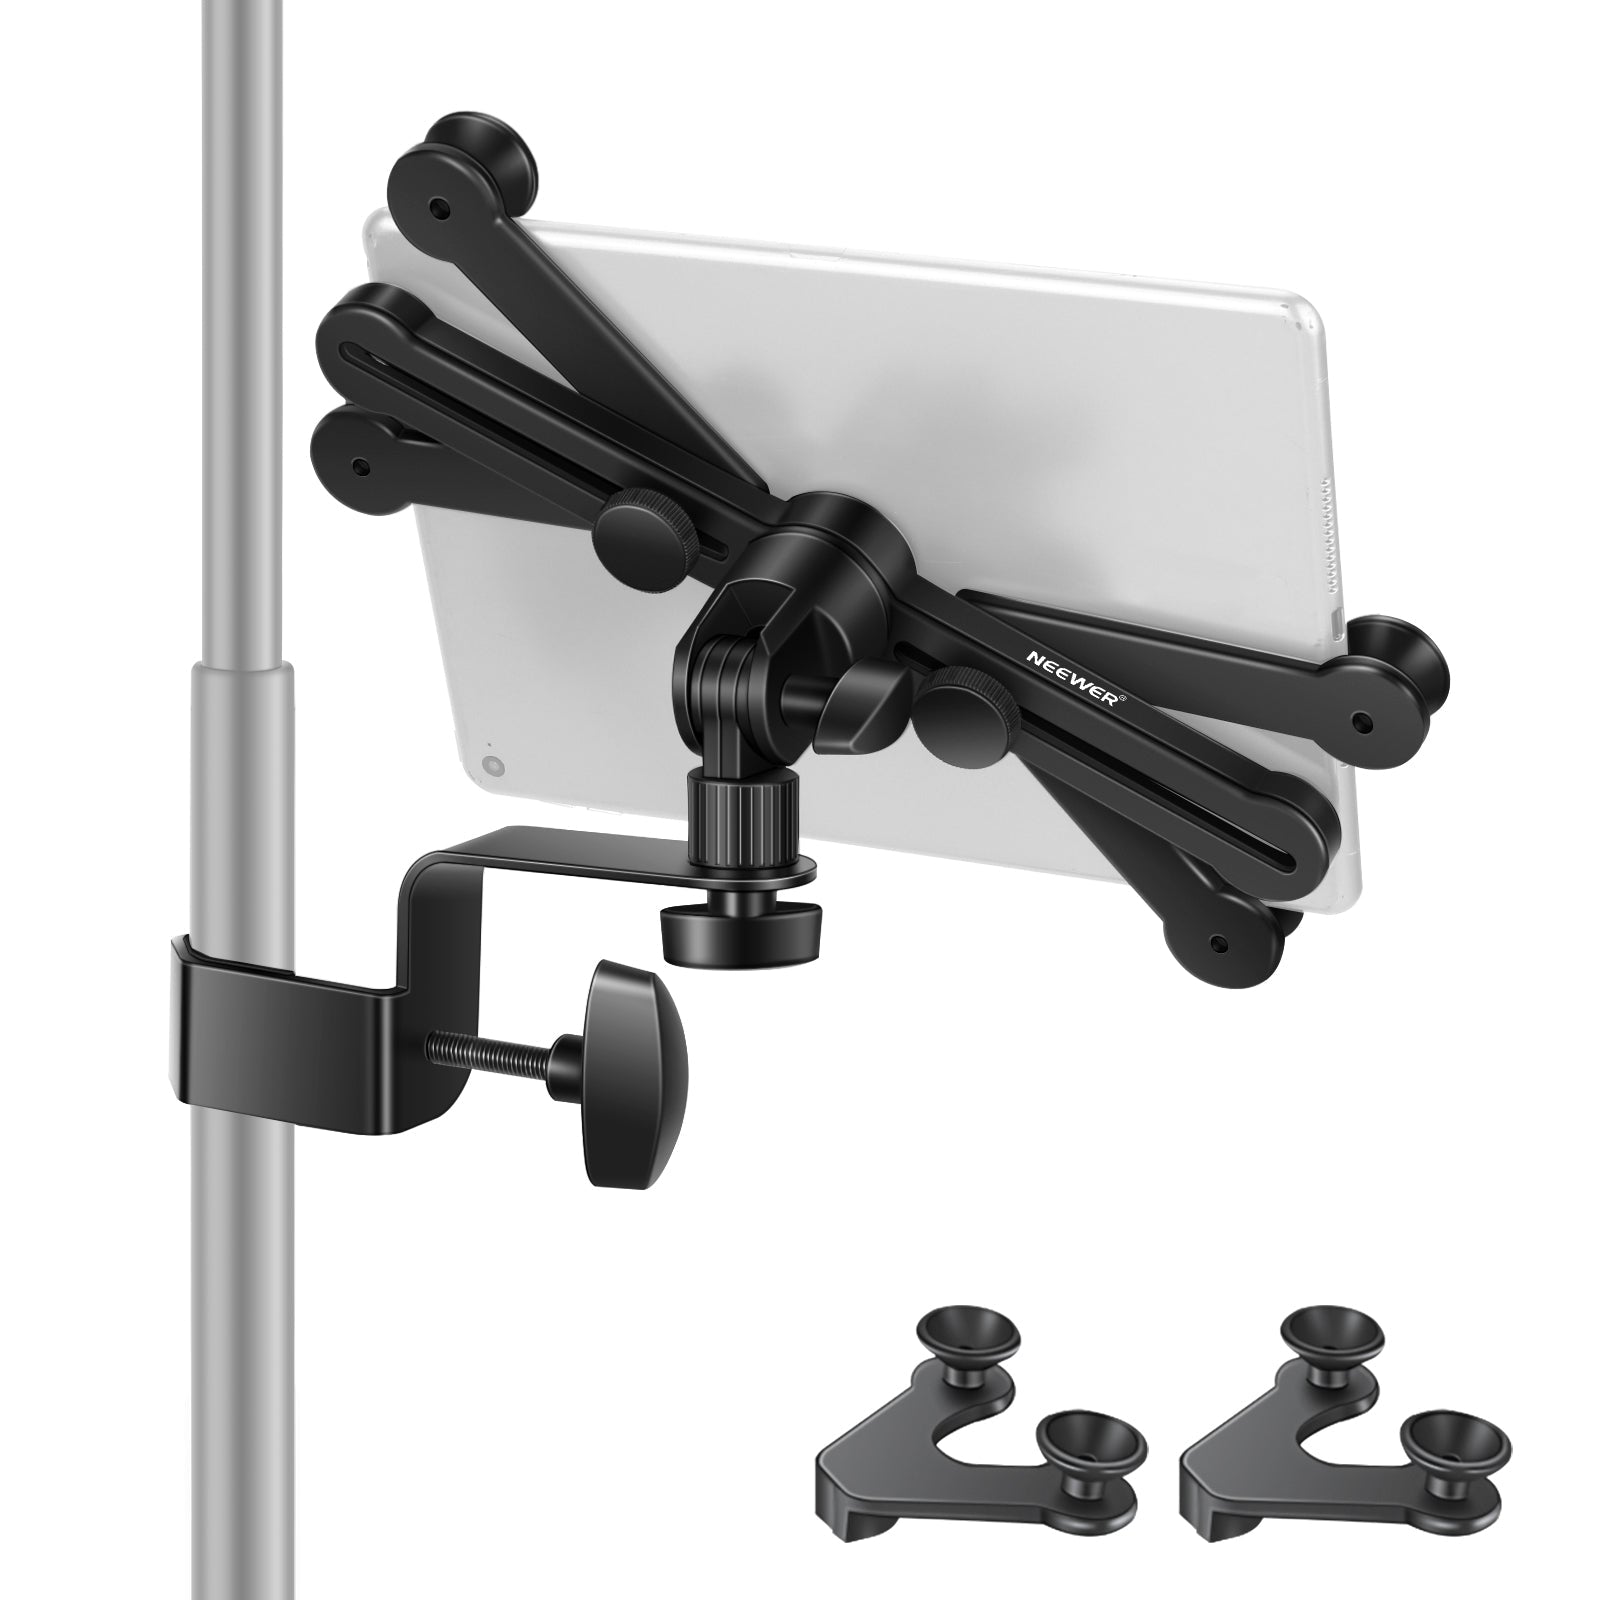 NEEWER 7-14 inch Adjustable Tablet Holder Mount with 360 Degree